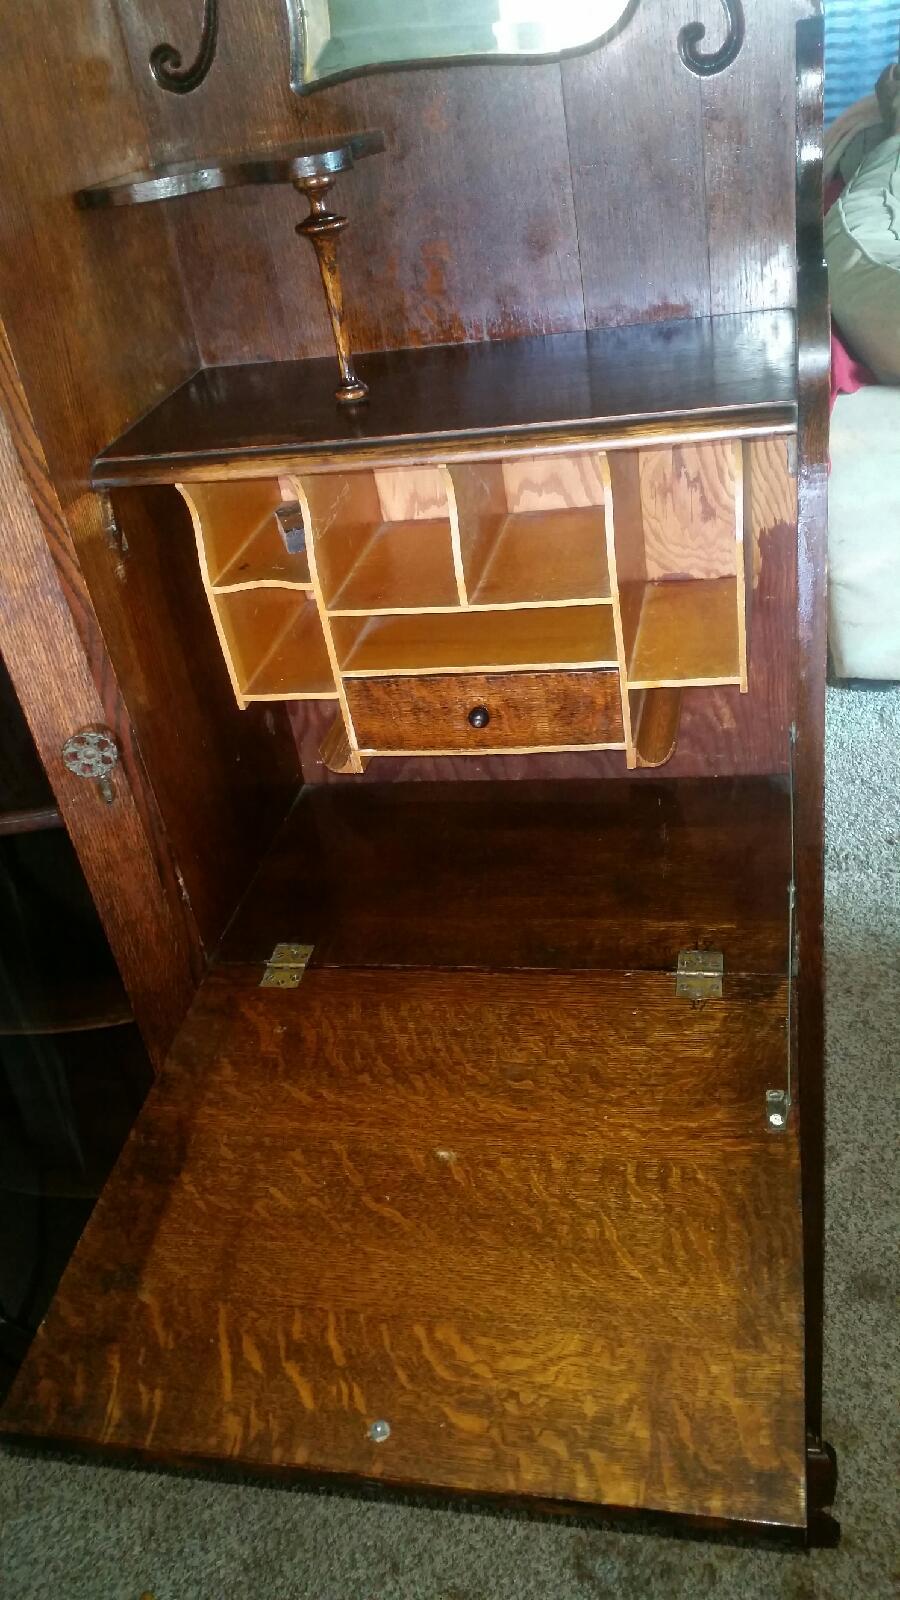 I Need Help Identifying The Age, Type And Worth Of This Antique ...